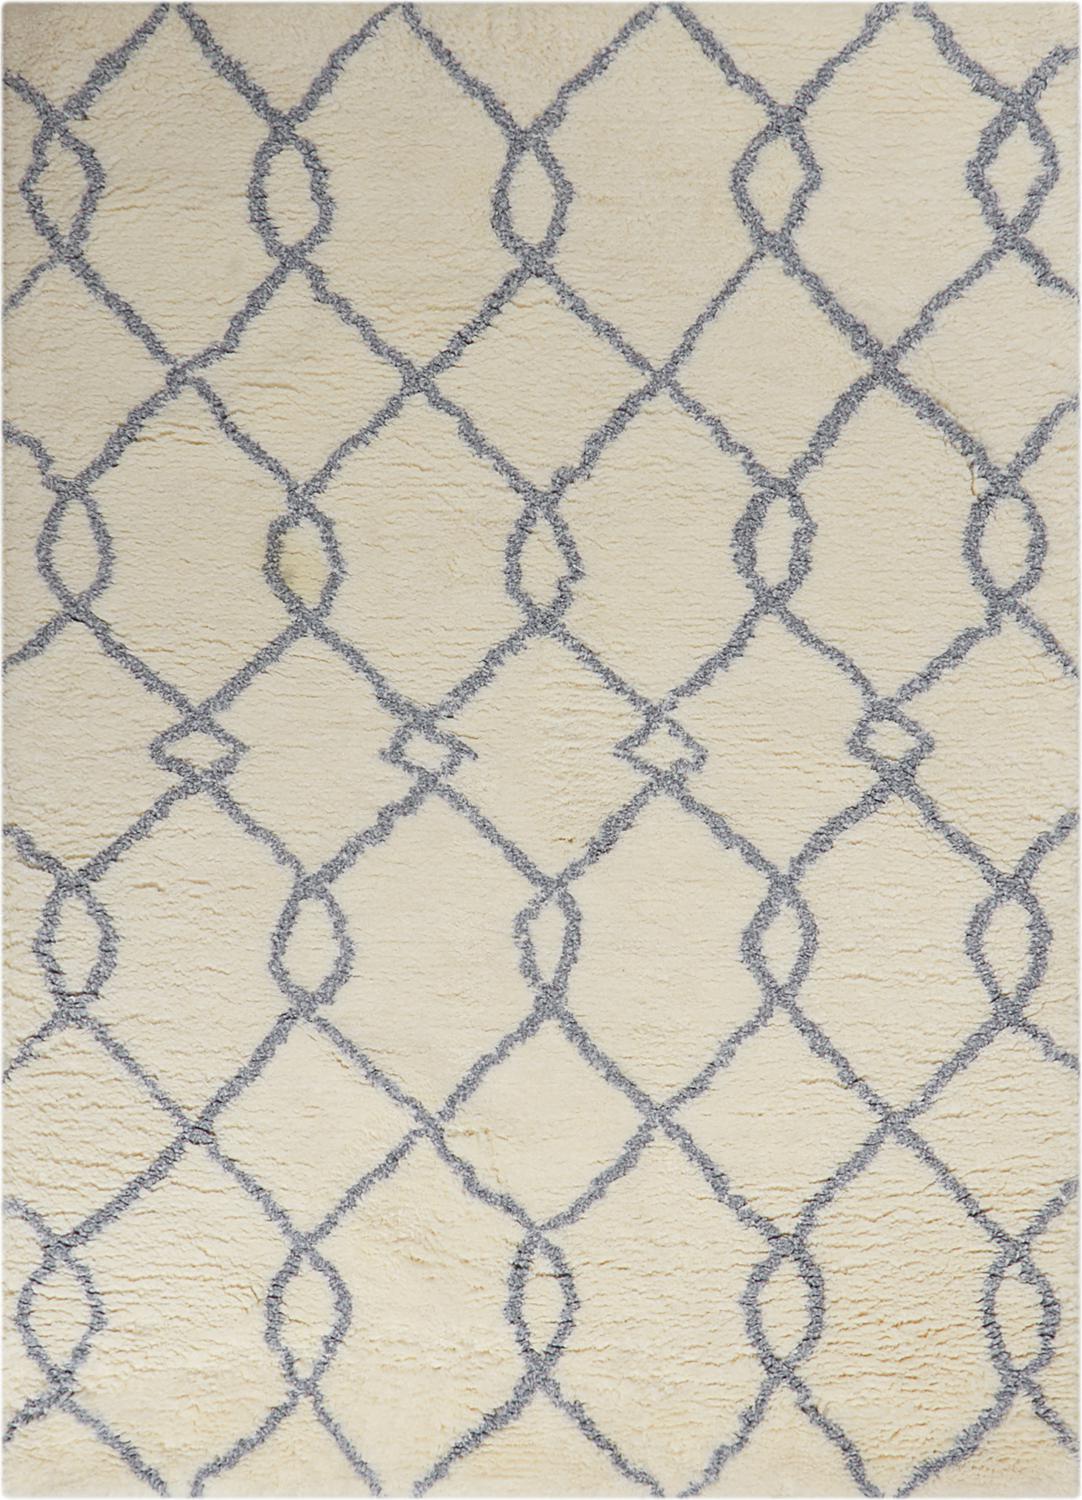 Nourison Galway Collection Glw02 5' X 7' Shag Area Rug